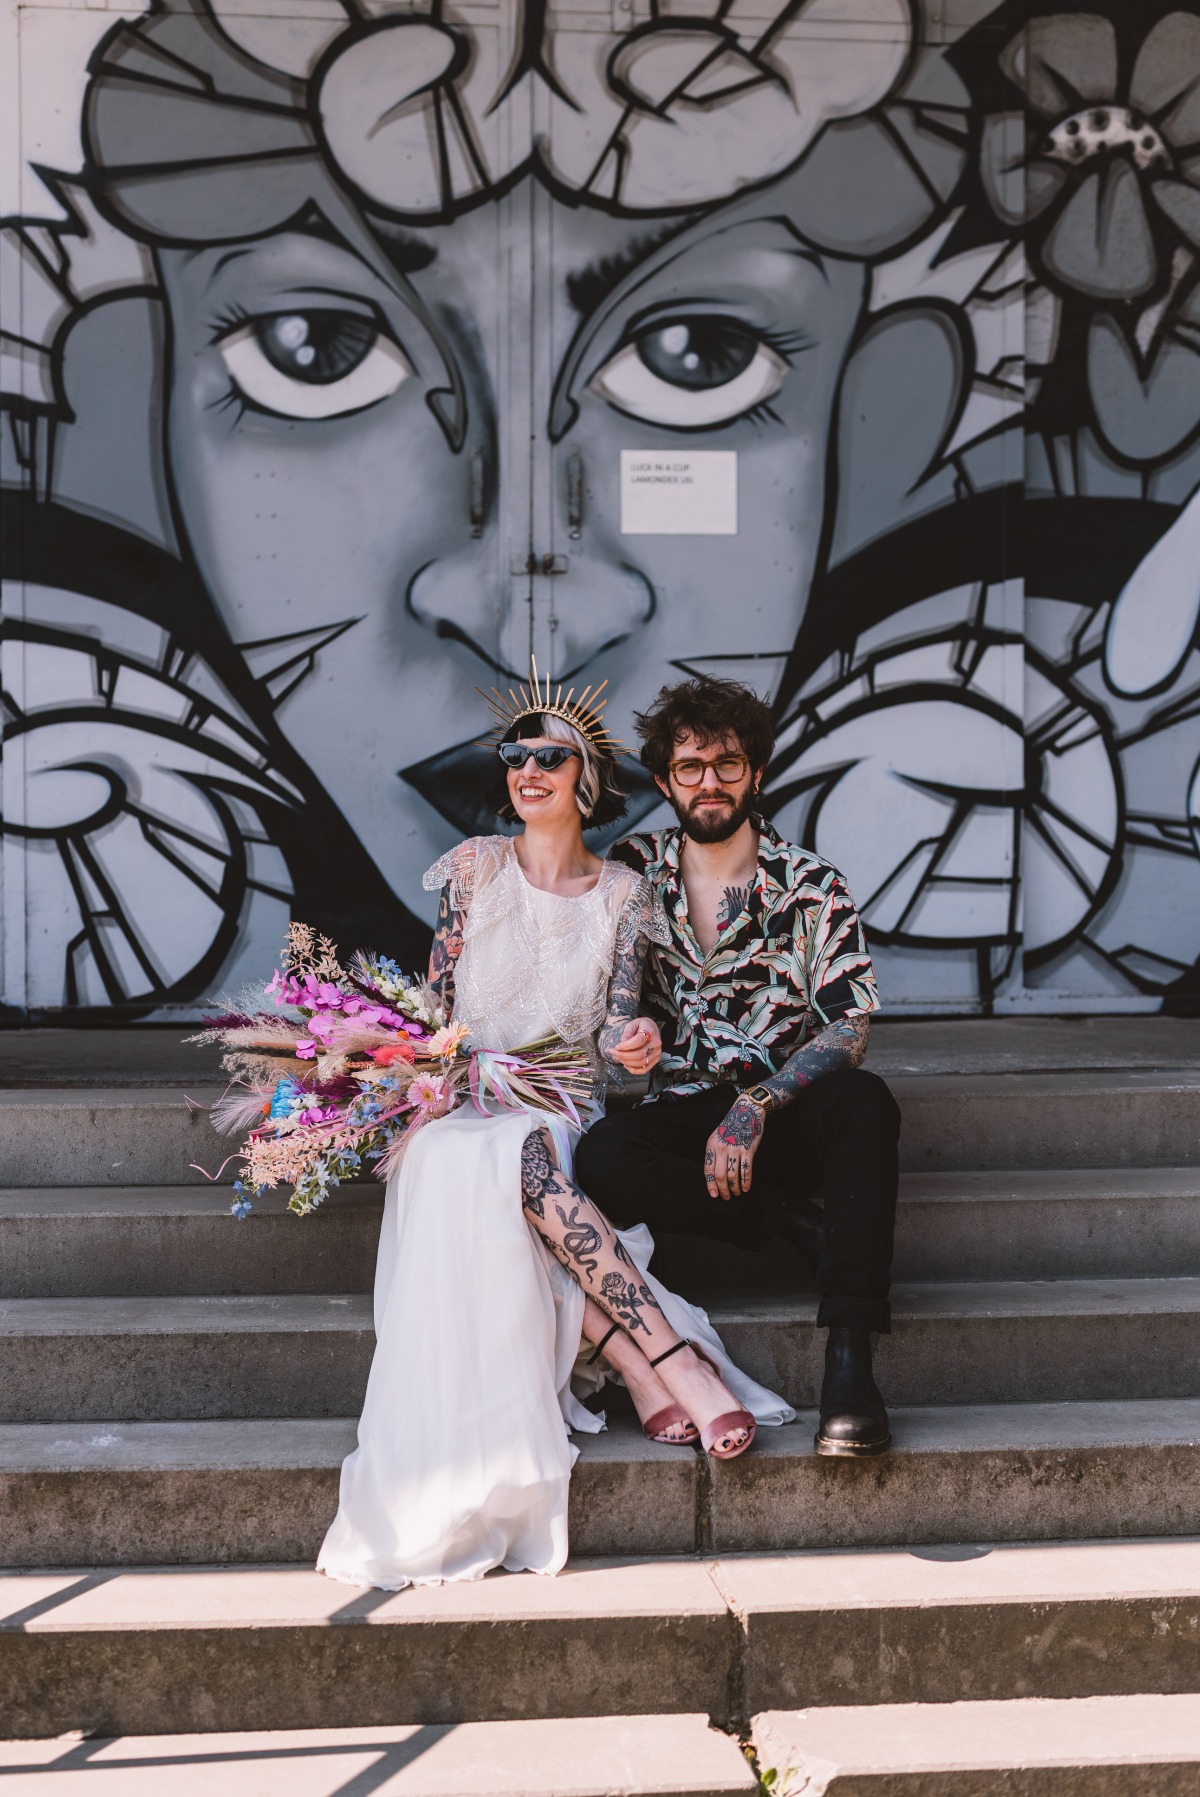 Couple seated on step in front of graffiti wall holding bouquet